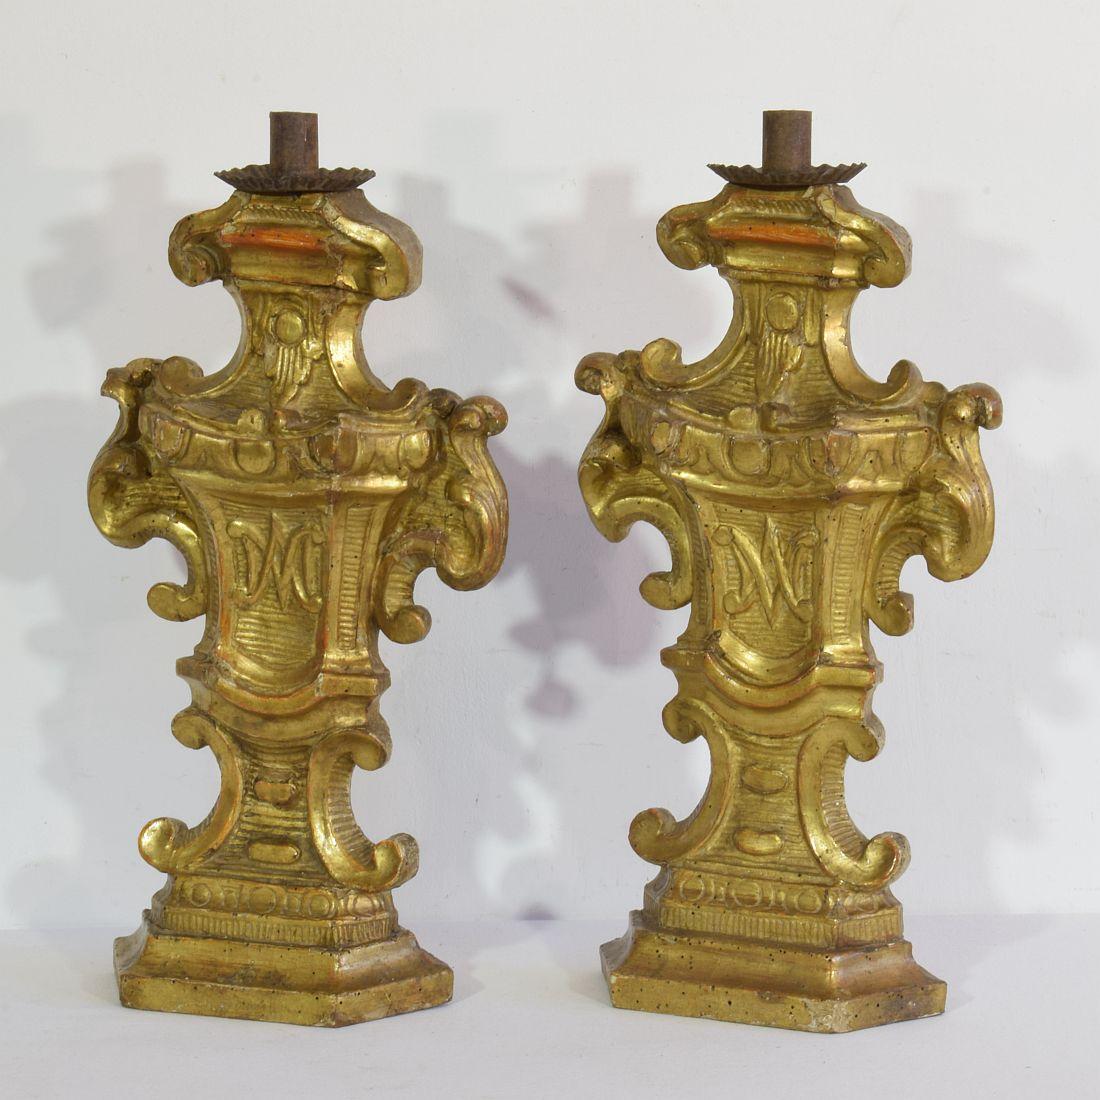 Hand-Carved Pair of 18th Century Italian Carved Giltwood Baroque Candleholders For Sale